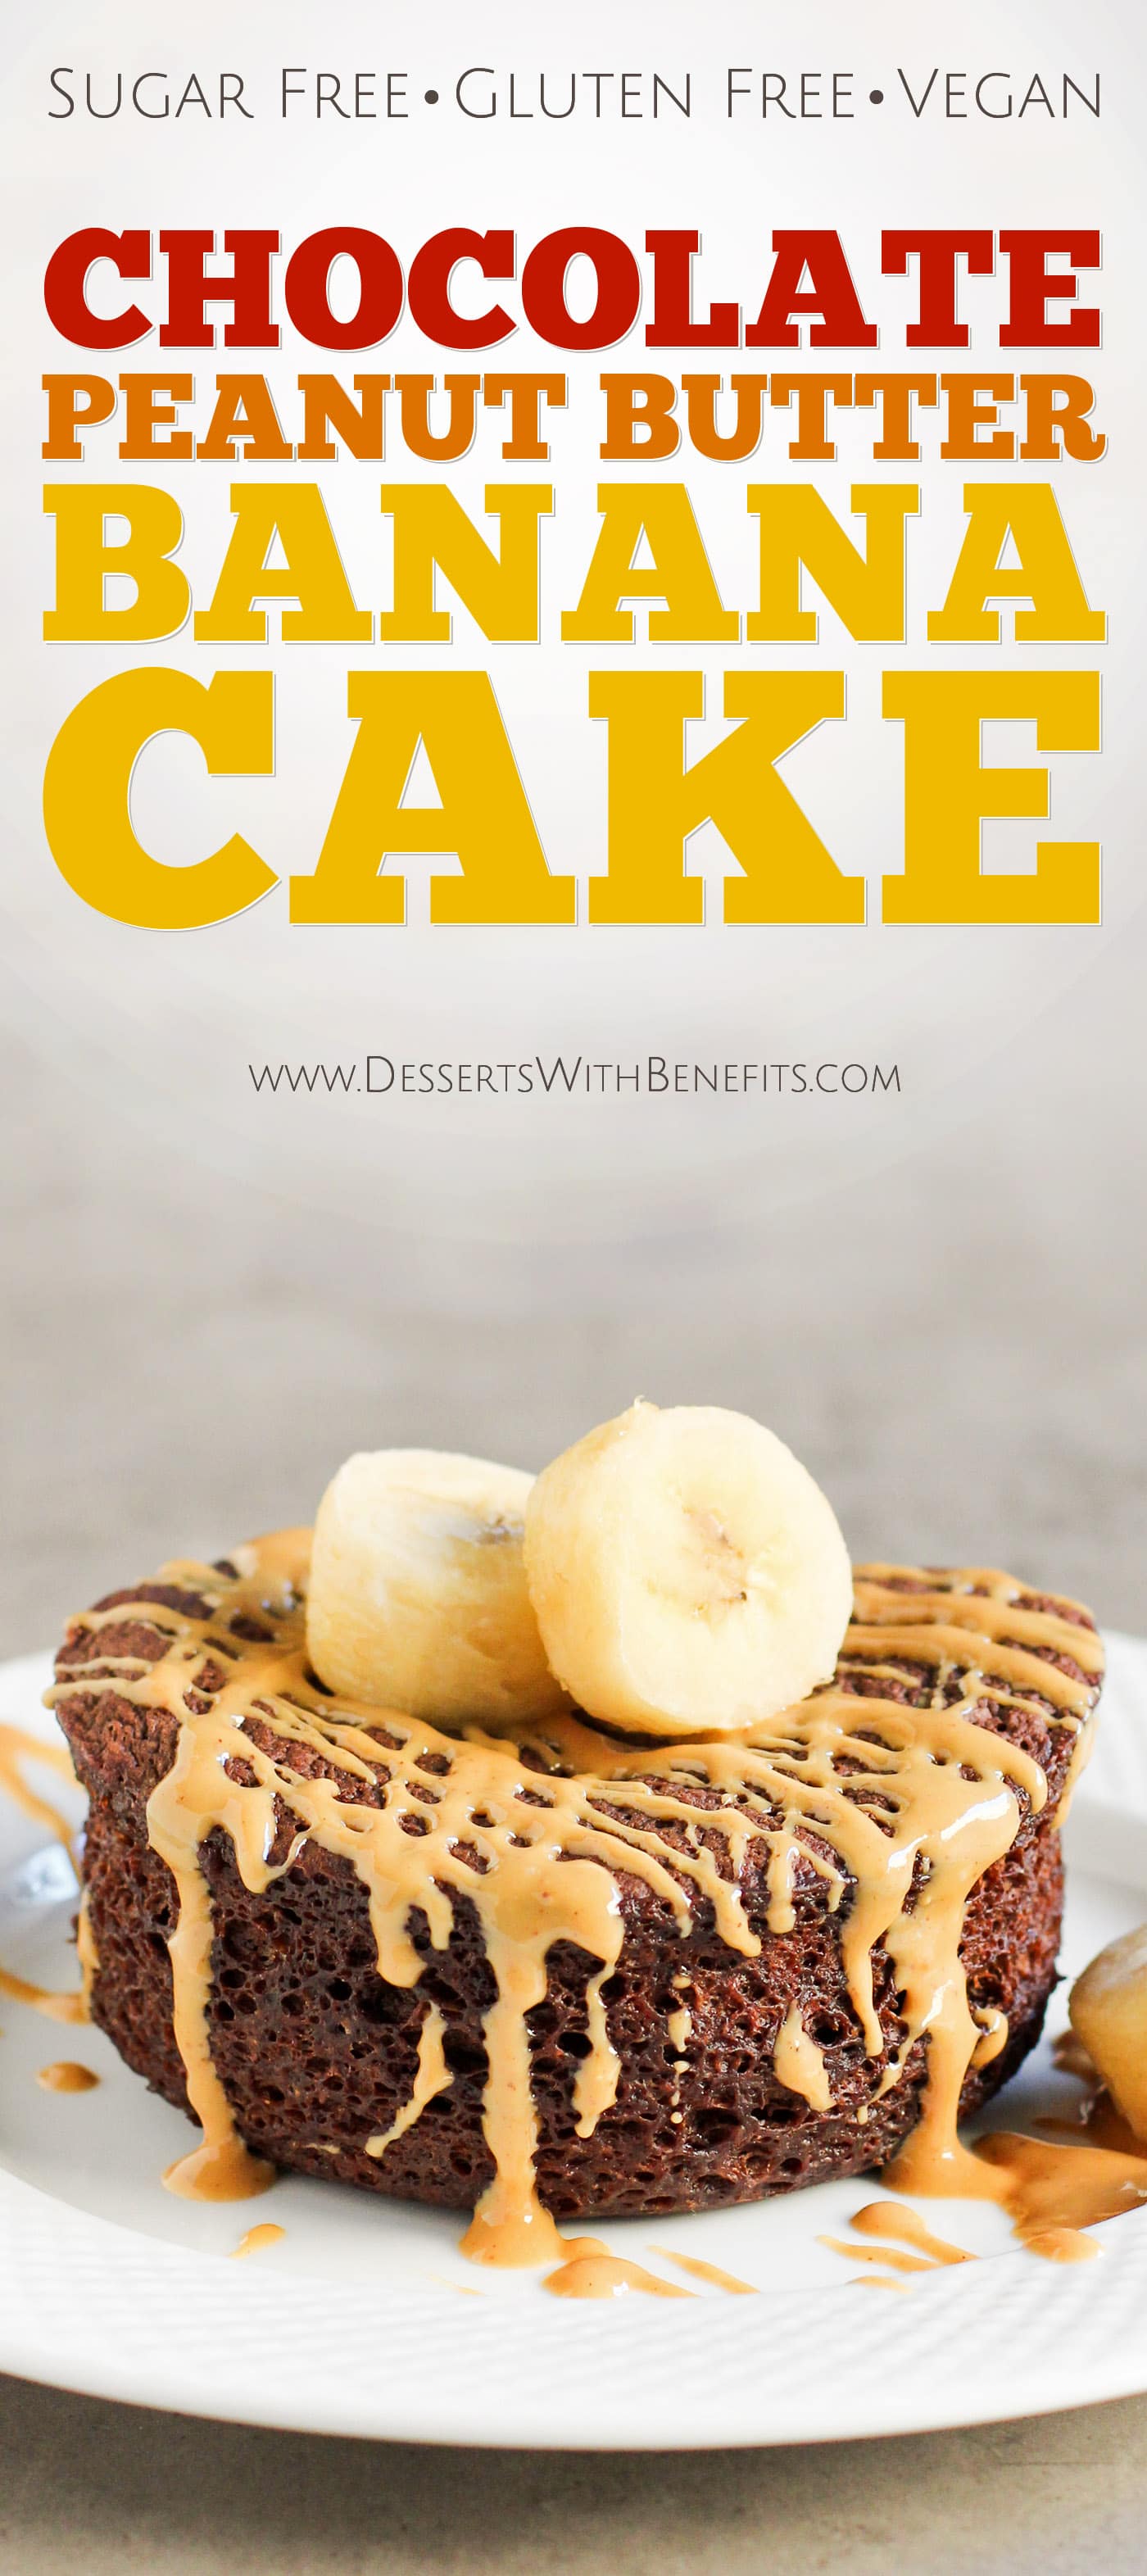 5-Minute Healthy Single-Serving Chocolate Peanut Butter Banana Microwave Cake (refined sugar free, high protein, high fiber, gluten free, vegan) -- Healthy Dessert Recipes at the Desserts With Benefits Blog